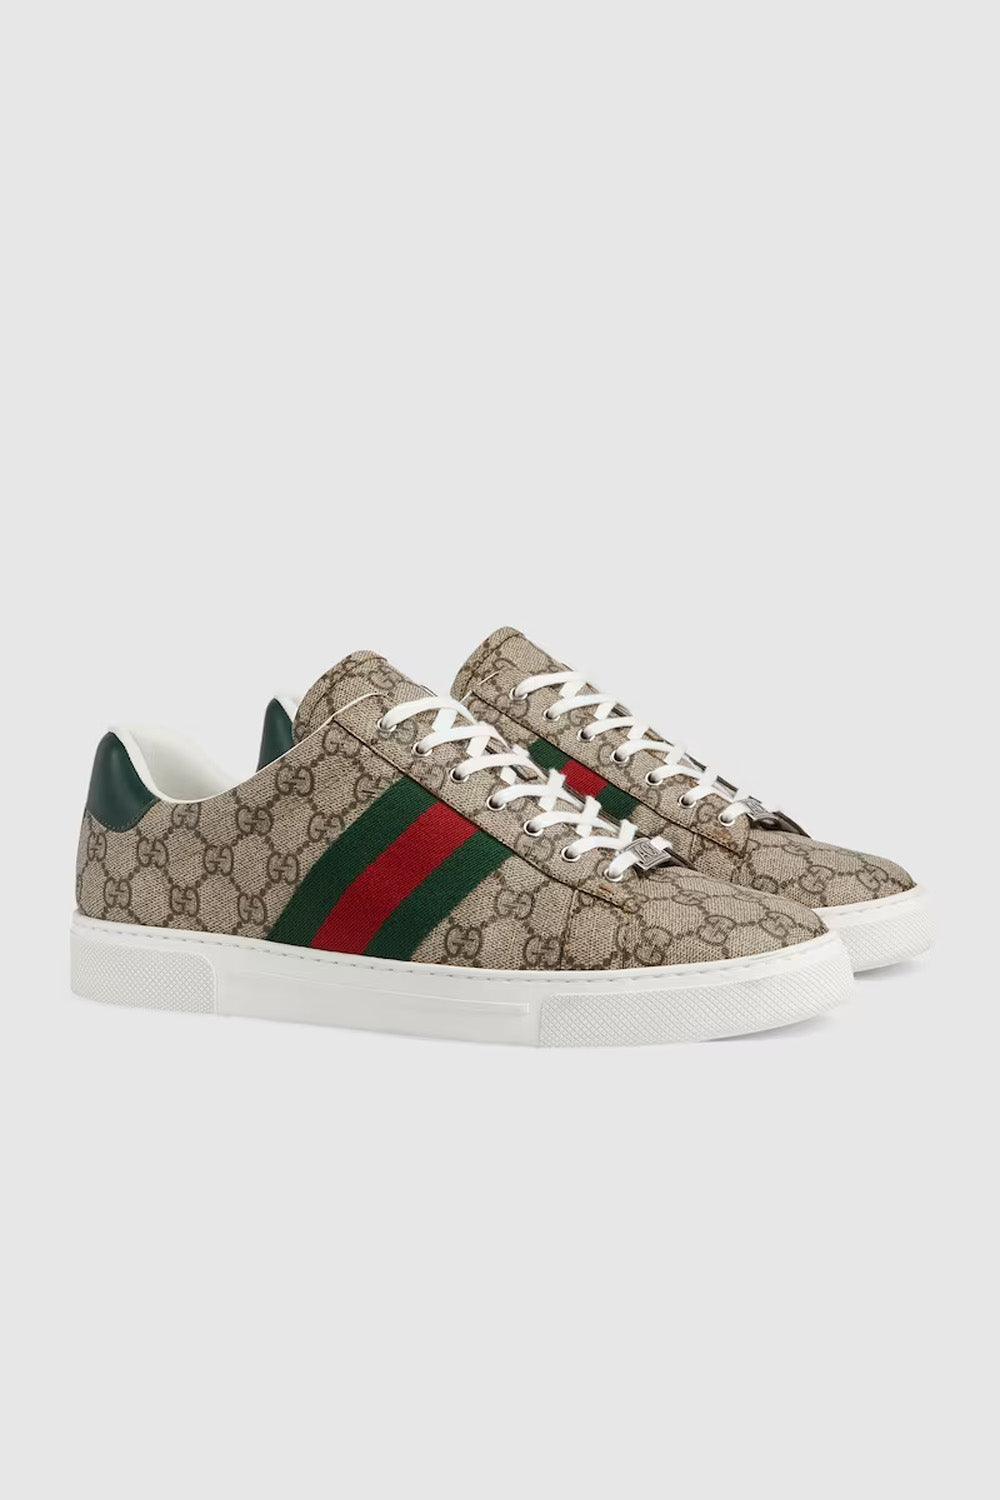 Gucci Men's Gucci Ace Trainer With Web